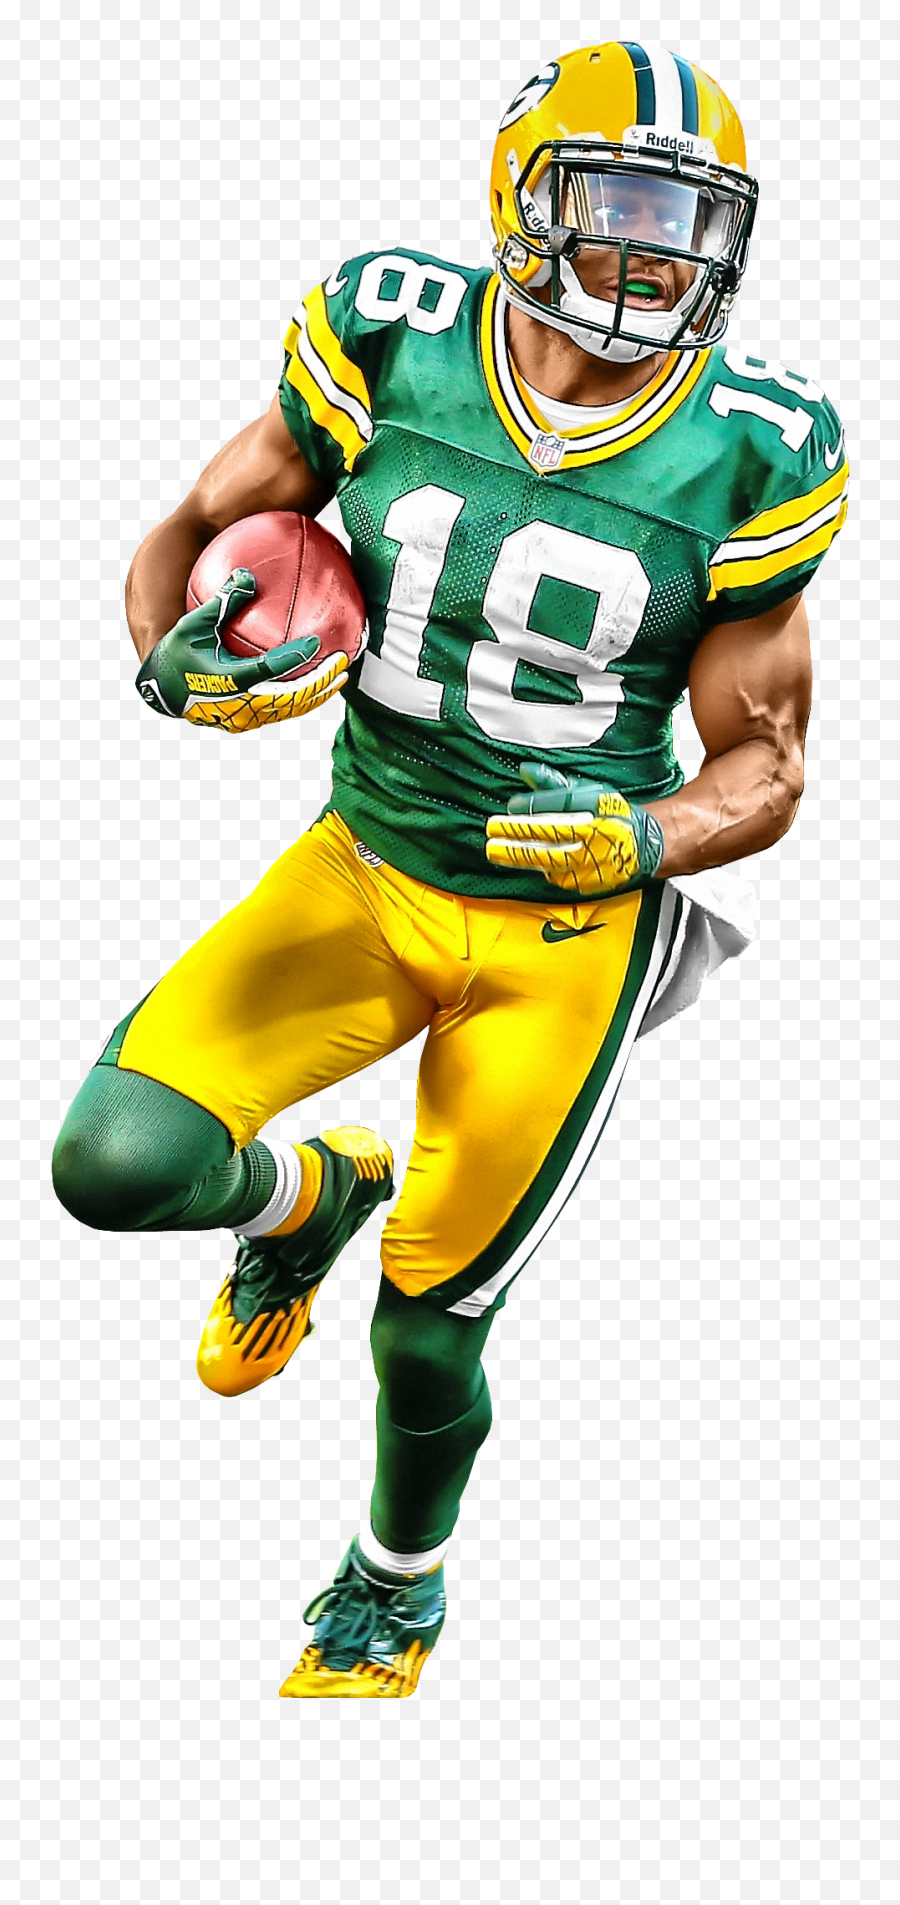 Download American Football Player Png - Packer Player With Football,American Football Player Png